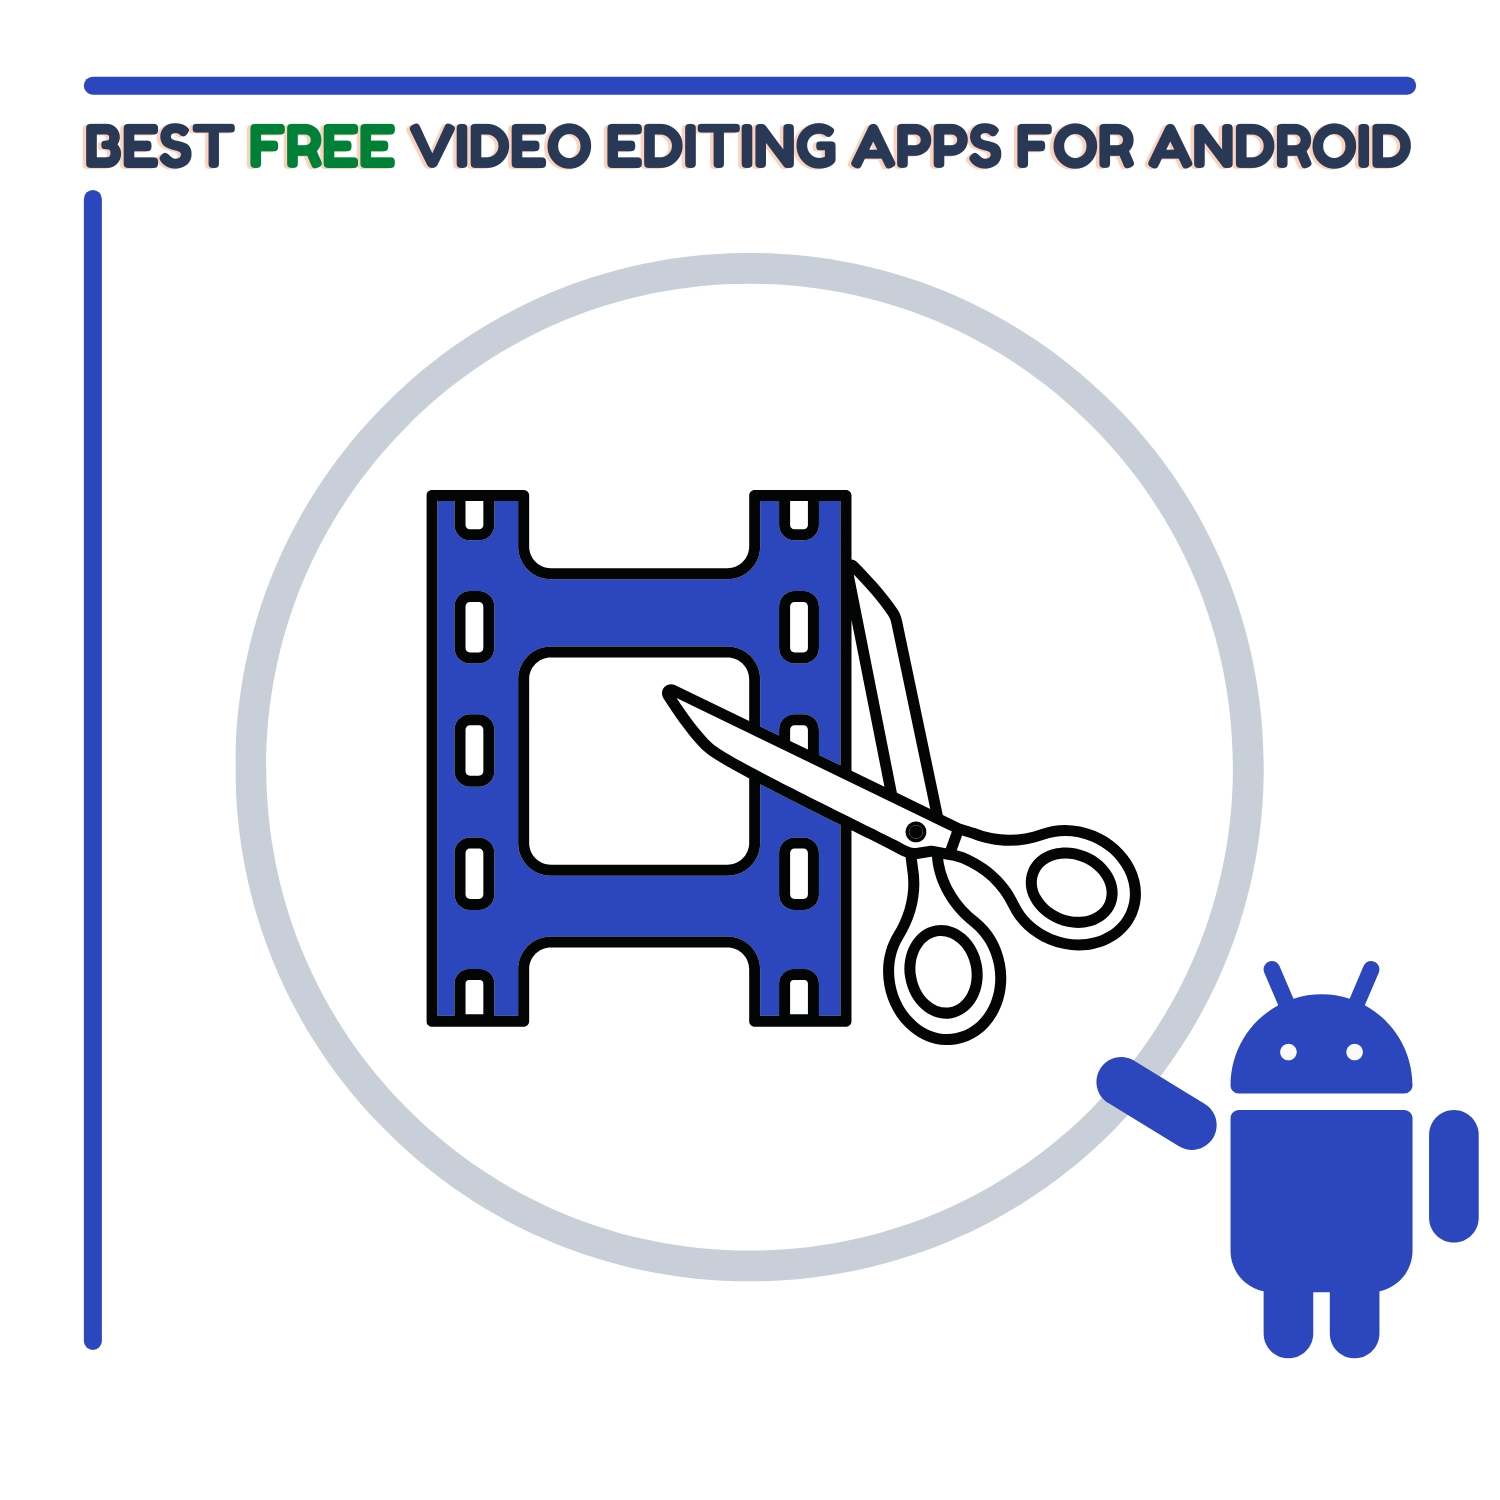 13 Best Android Video Editing Apps Without Watermark (Tested)